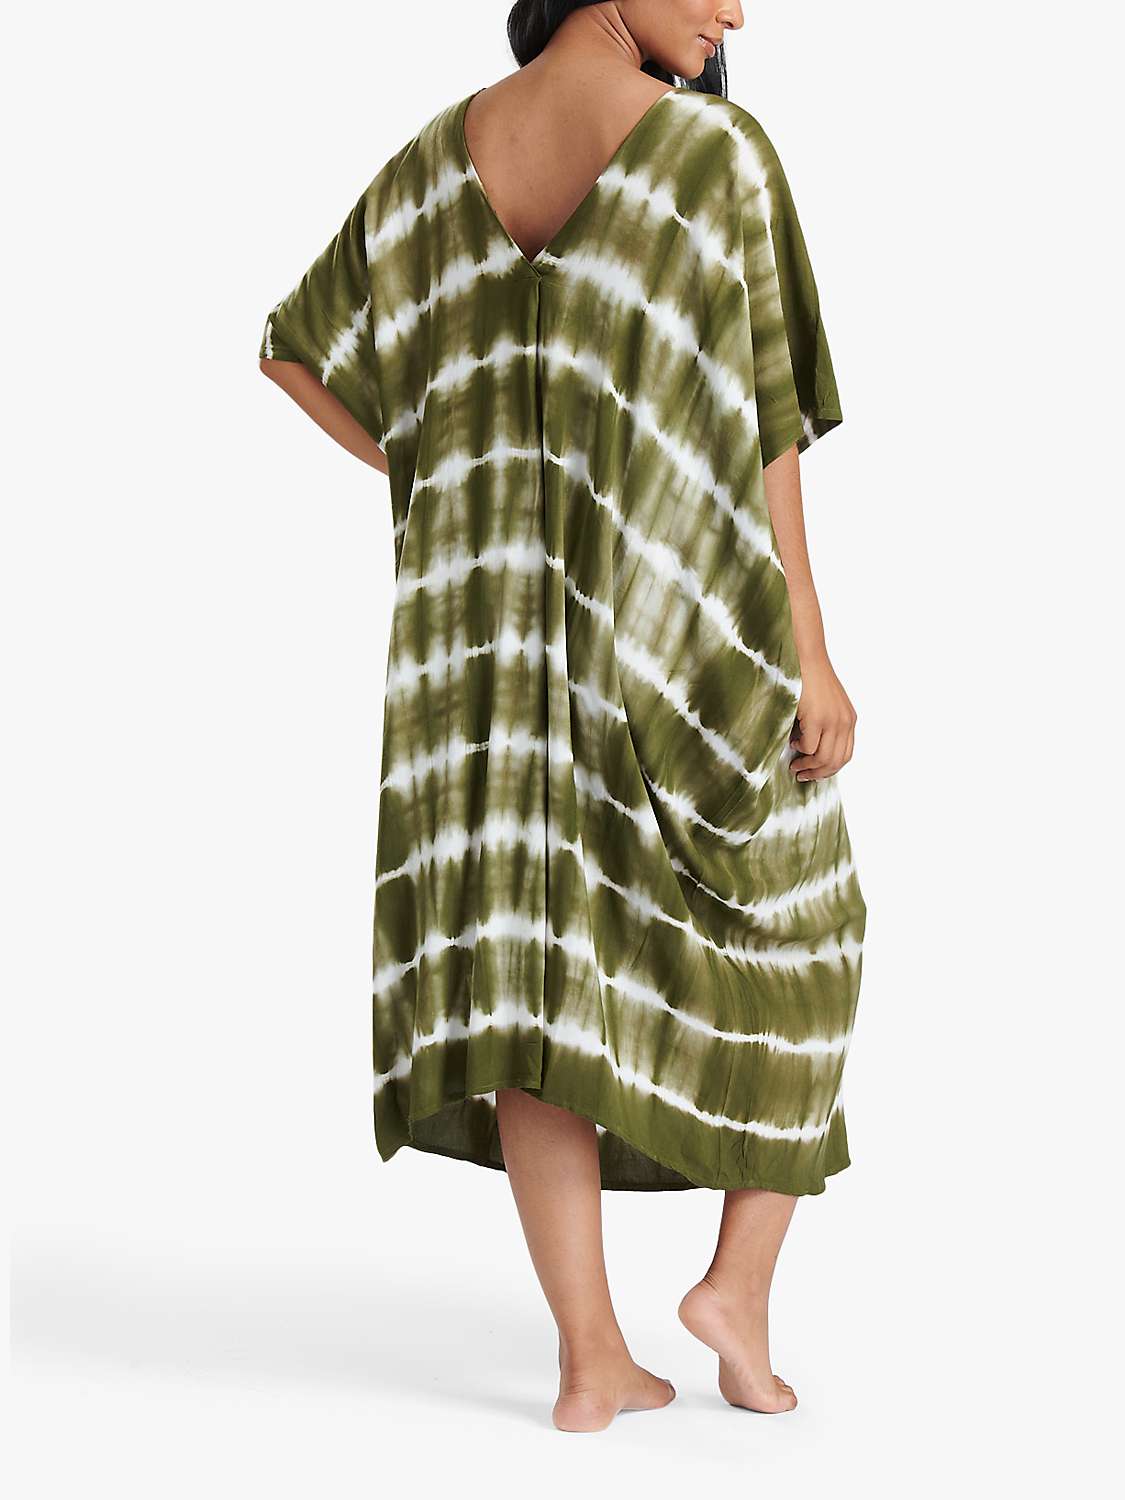 Buy South Beach Striped Tie Dye Maxi Dress, Olive/White Online at johnlewis.com